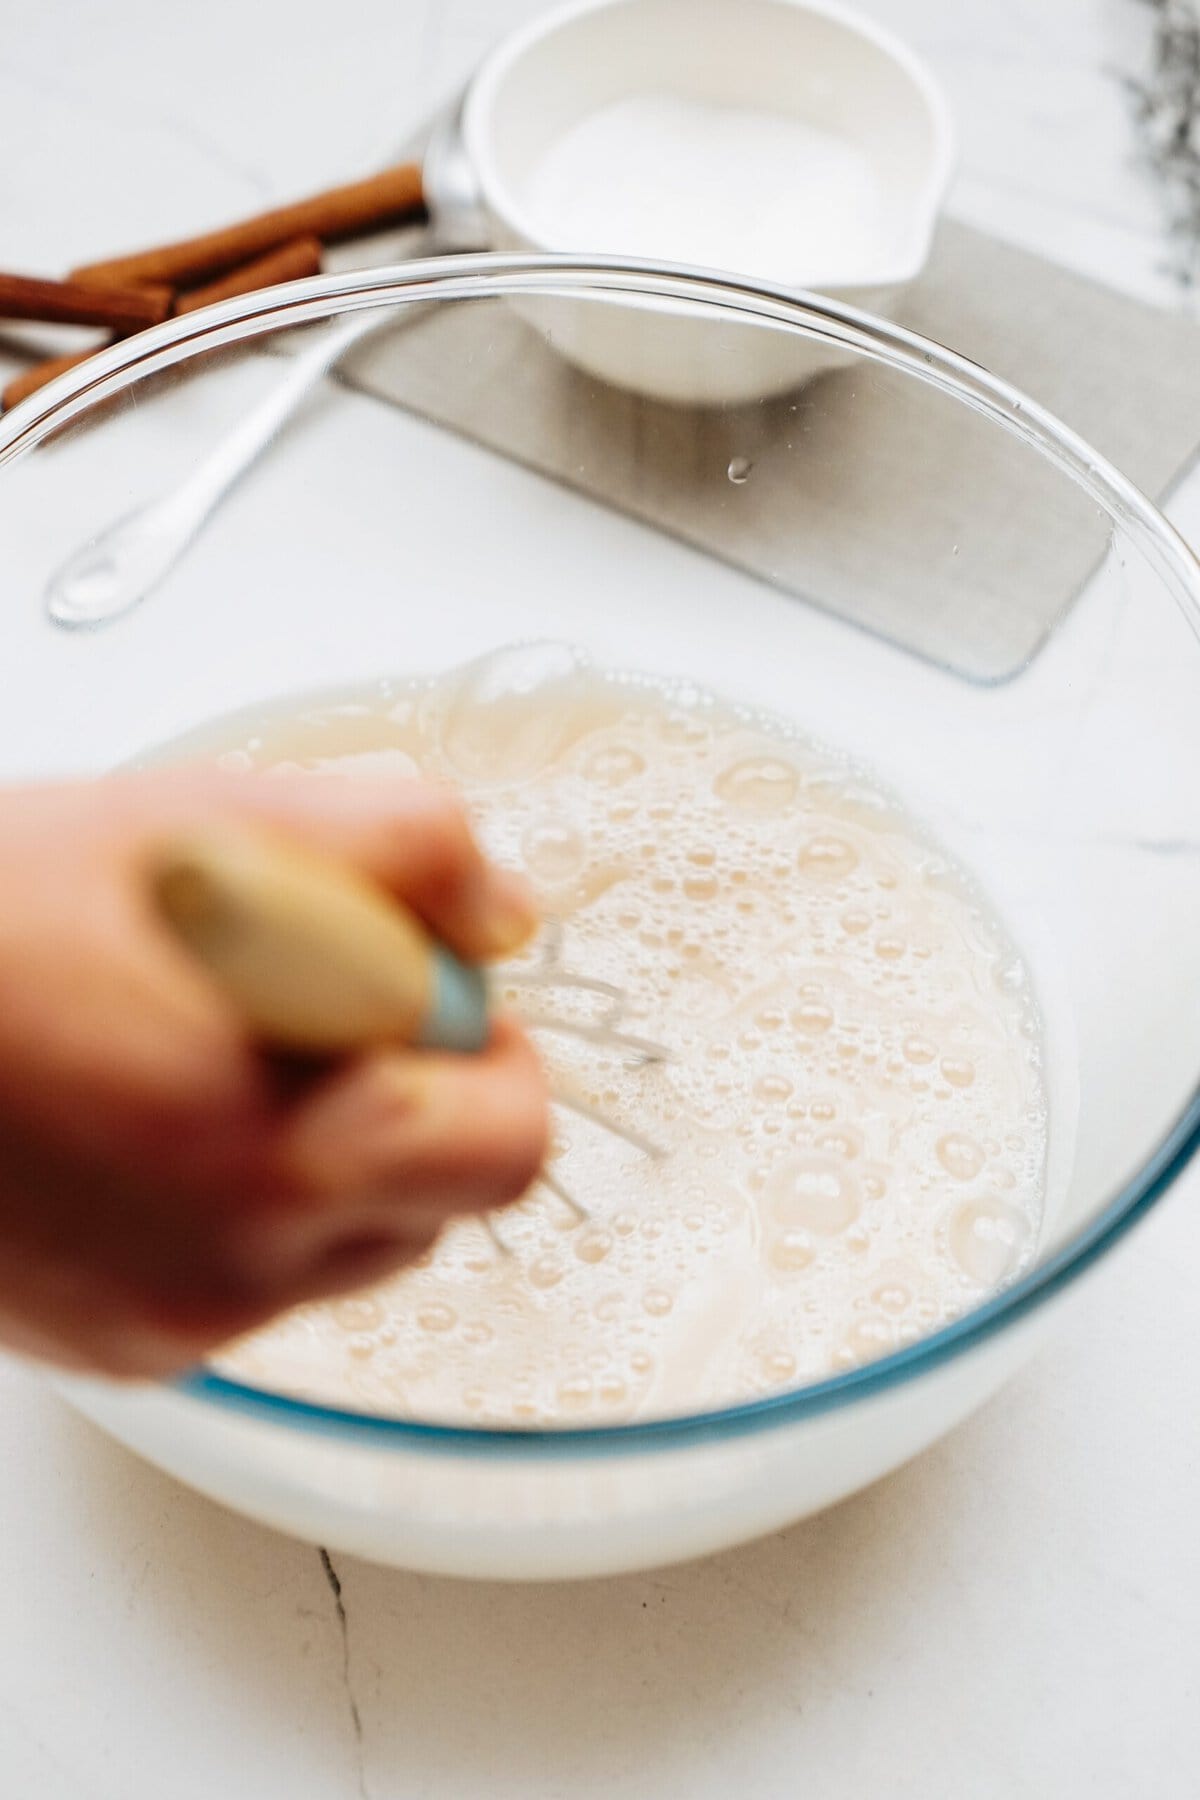 A hand whisking a frothy liquid in a clear glass bowl on a white countertop, with a small white bowl and cinnamon sticks in the background.